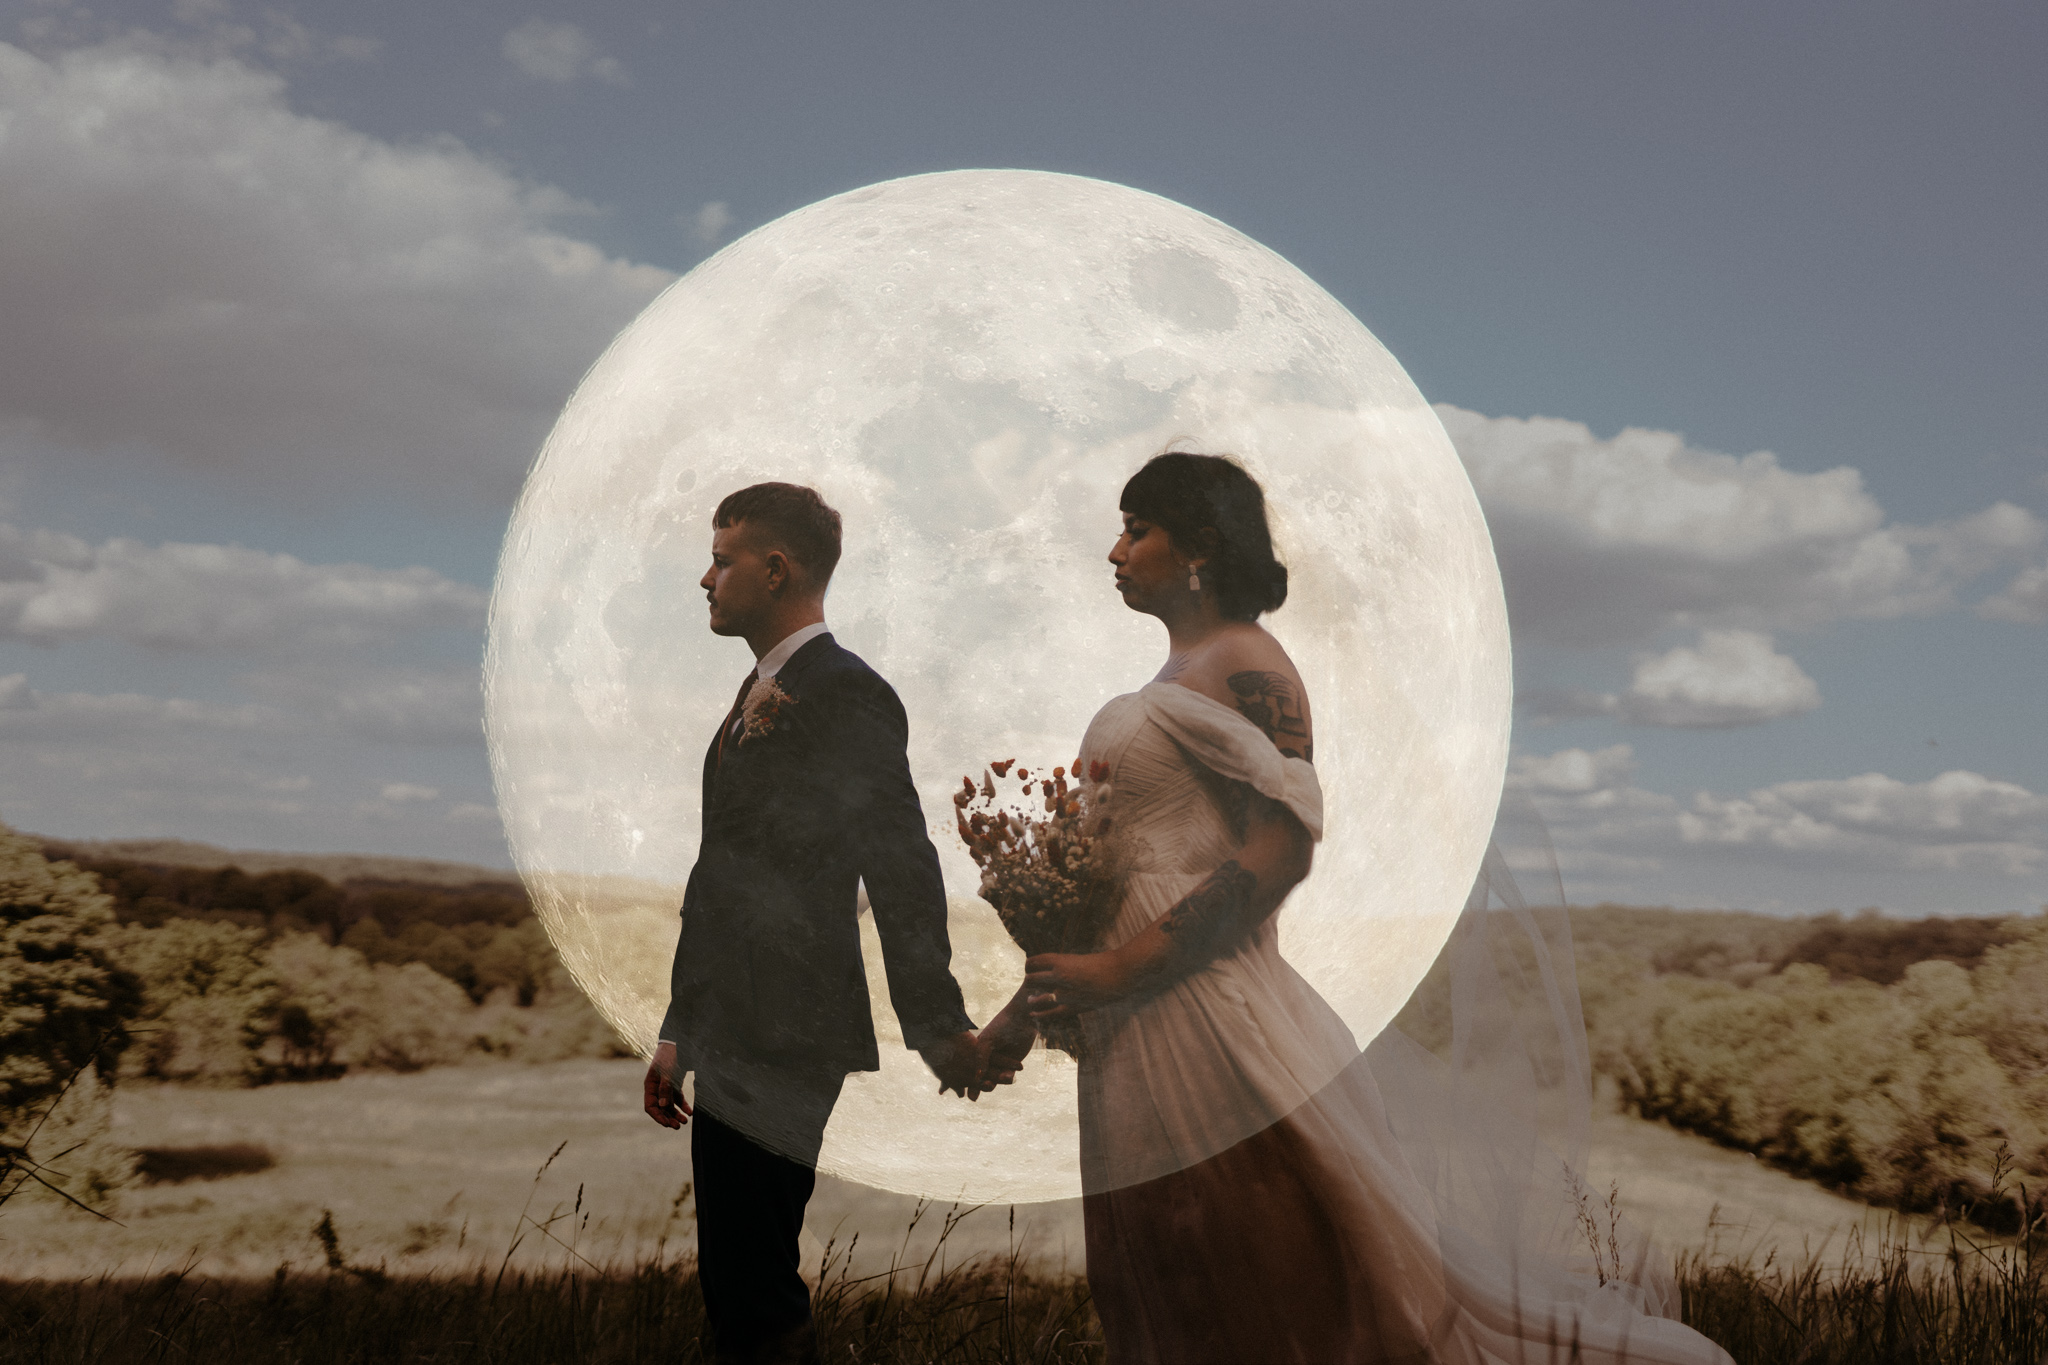 Lunar & desert-Inspired wedding in an open field // images by offbeat & non-traditional photographer Victoria Selman